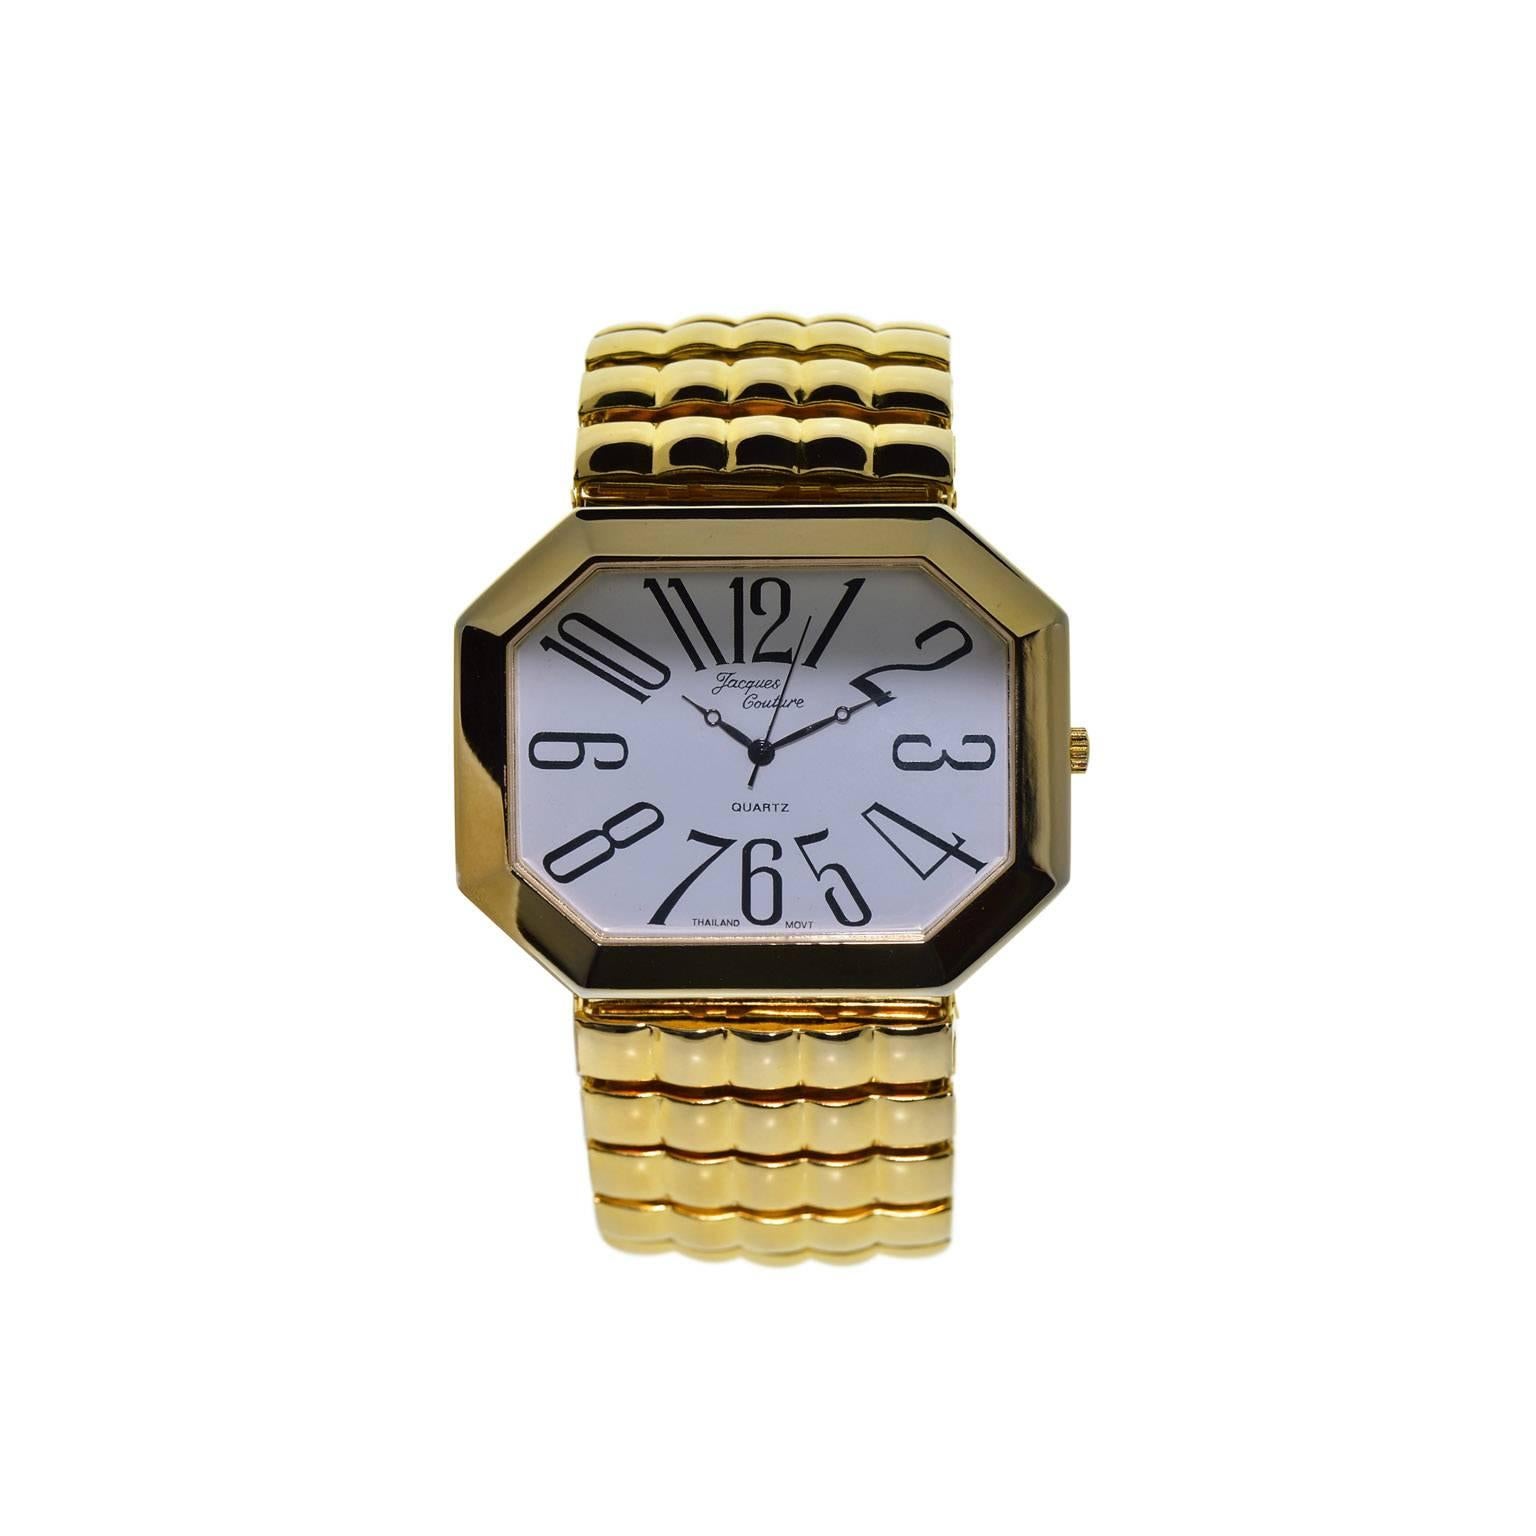 FACTORY / HOUSE: Jacques Couture
STYLE / REFERENCE: Modern Oversized 
METAL / MATERIAL: Gold Plated
CIRCA: 1980's
DIMENSIONS: Length 52mm X Width 41mm
MOVEMENT / CALIBER: Quartz 
DIAL / HANDS: Original White / Arabic Numerals / Breguet Blued Steel